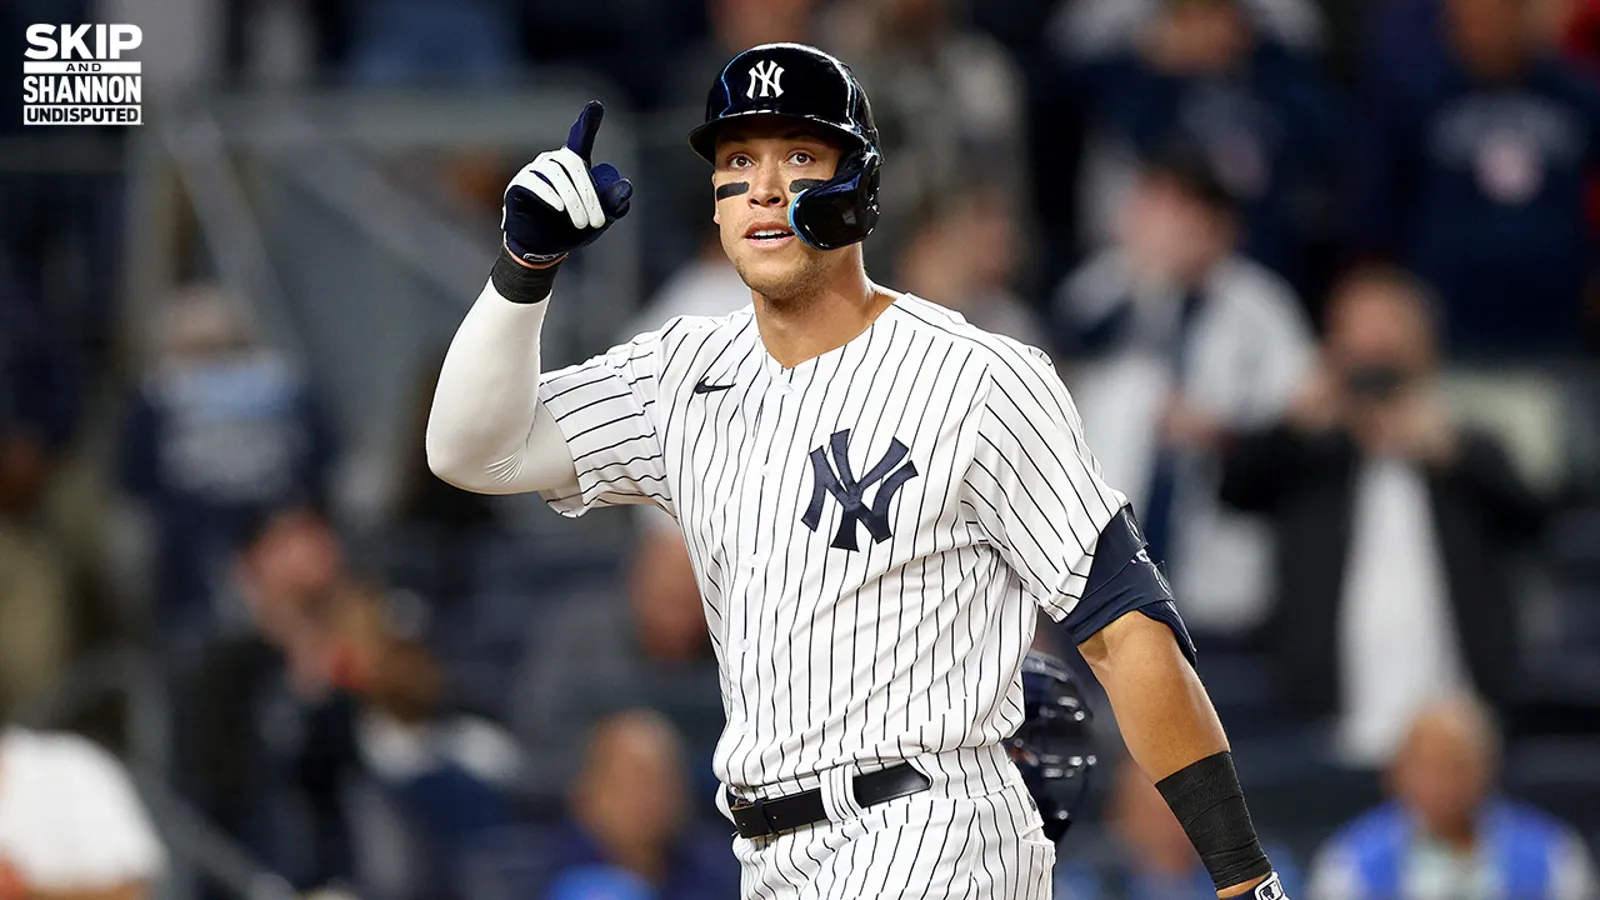 Aaron Judge sits one home run shy of tying the AL record